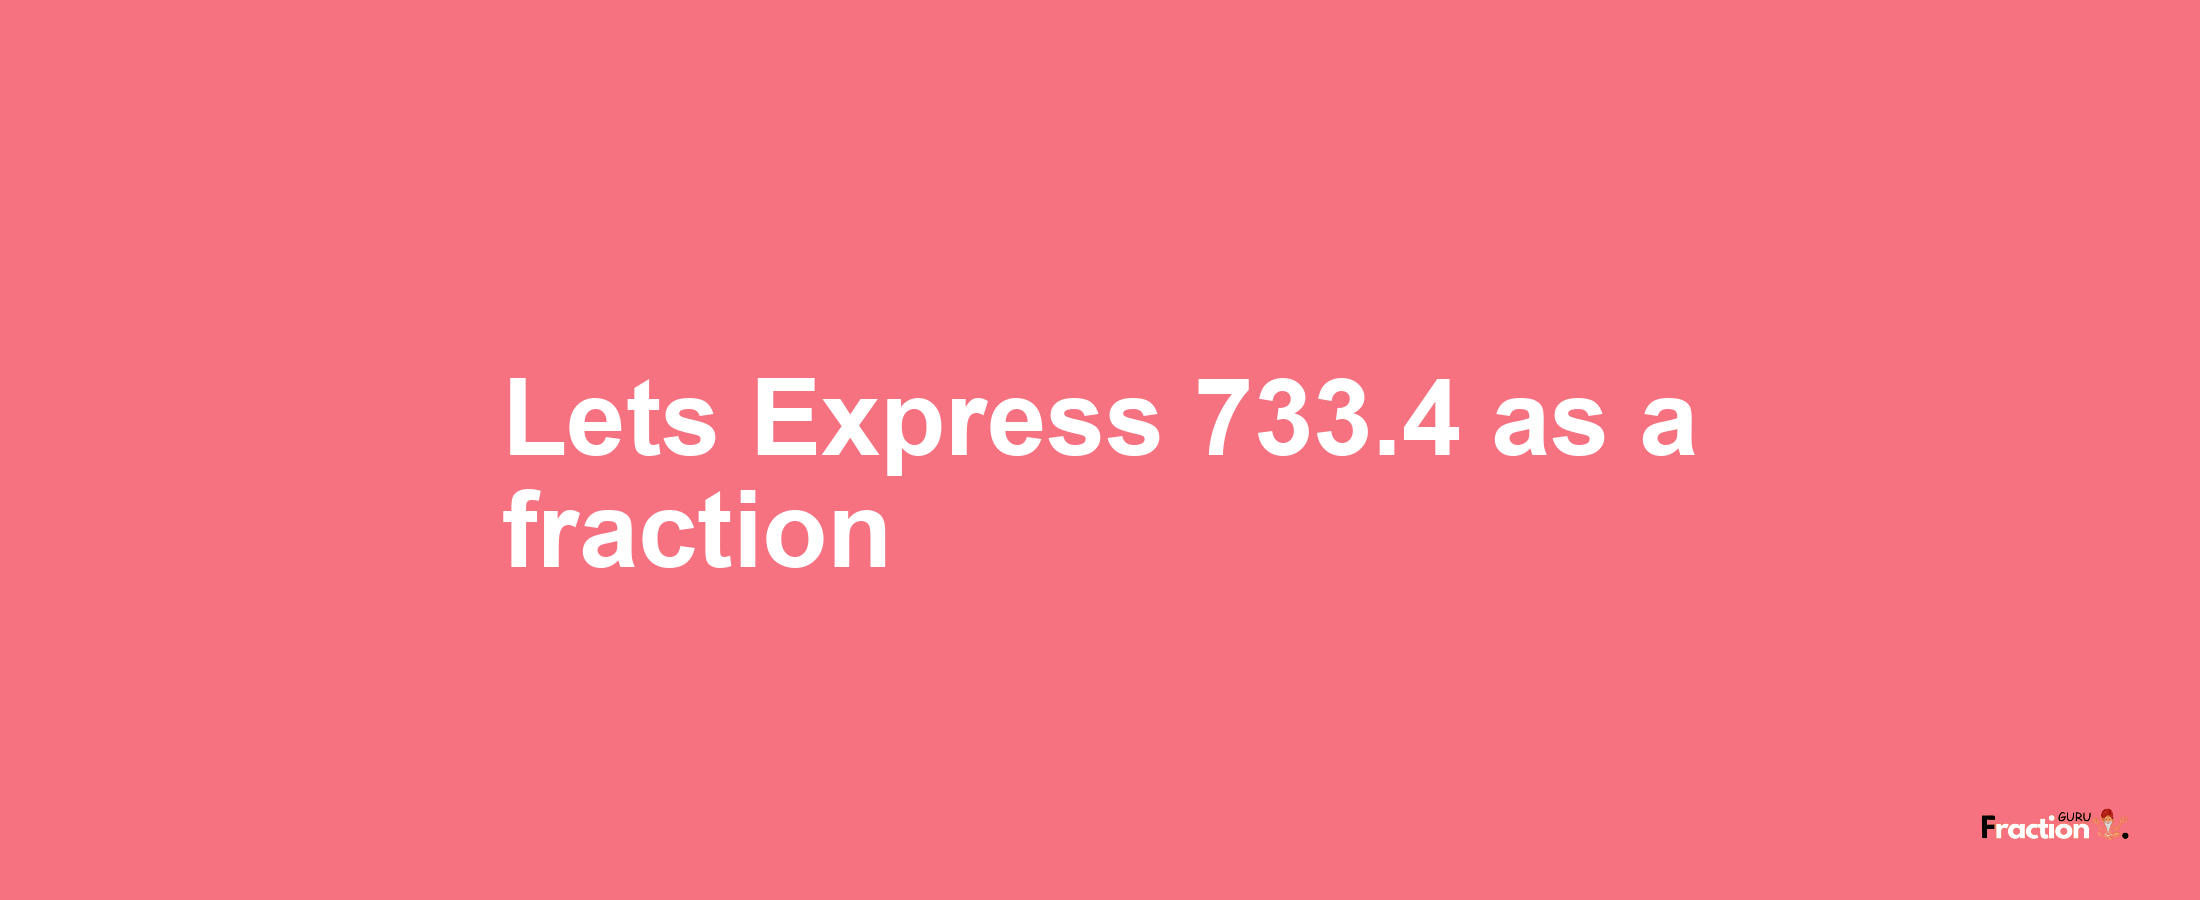 Lets Express 733.4 as afraction